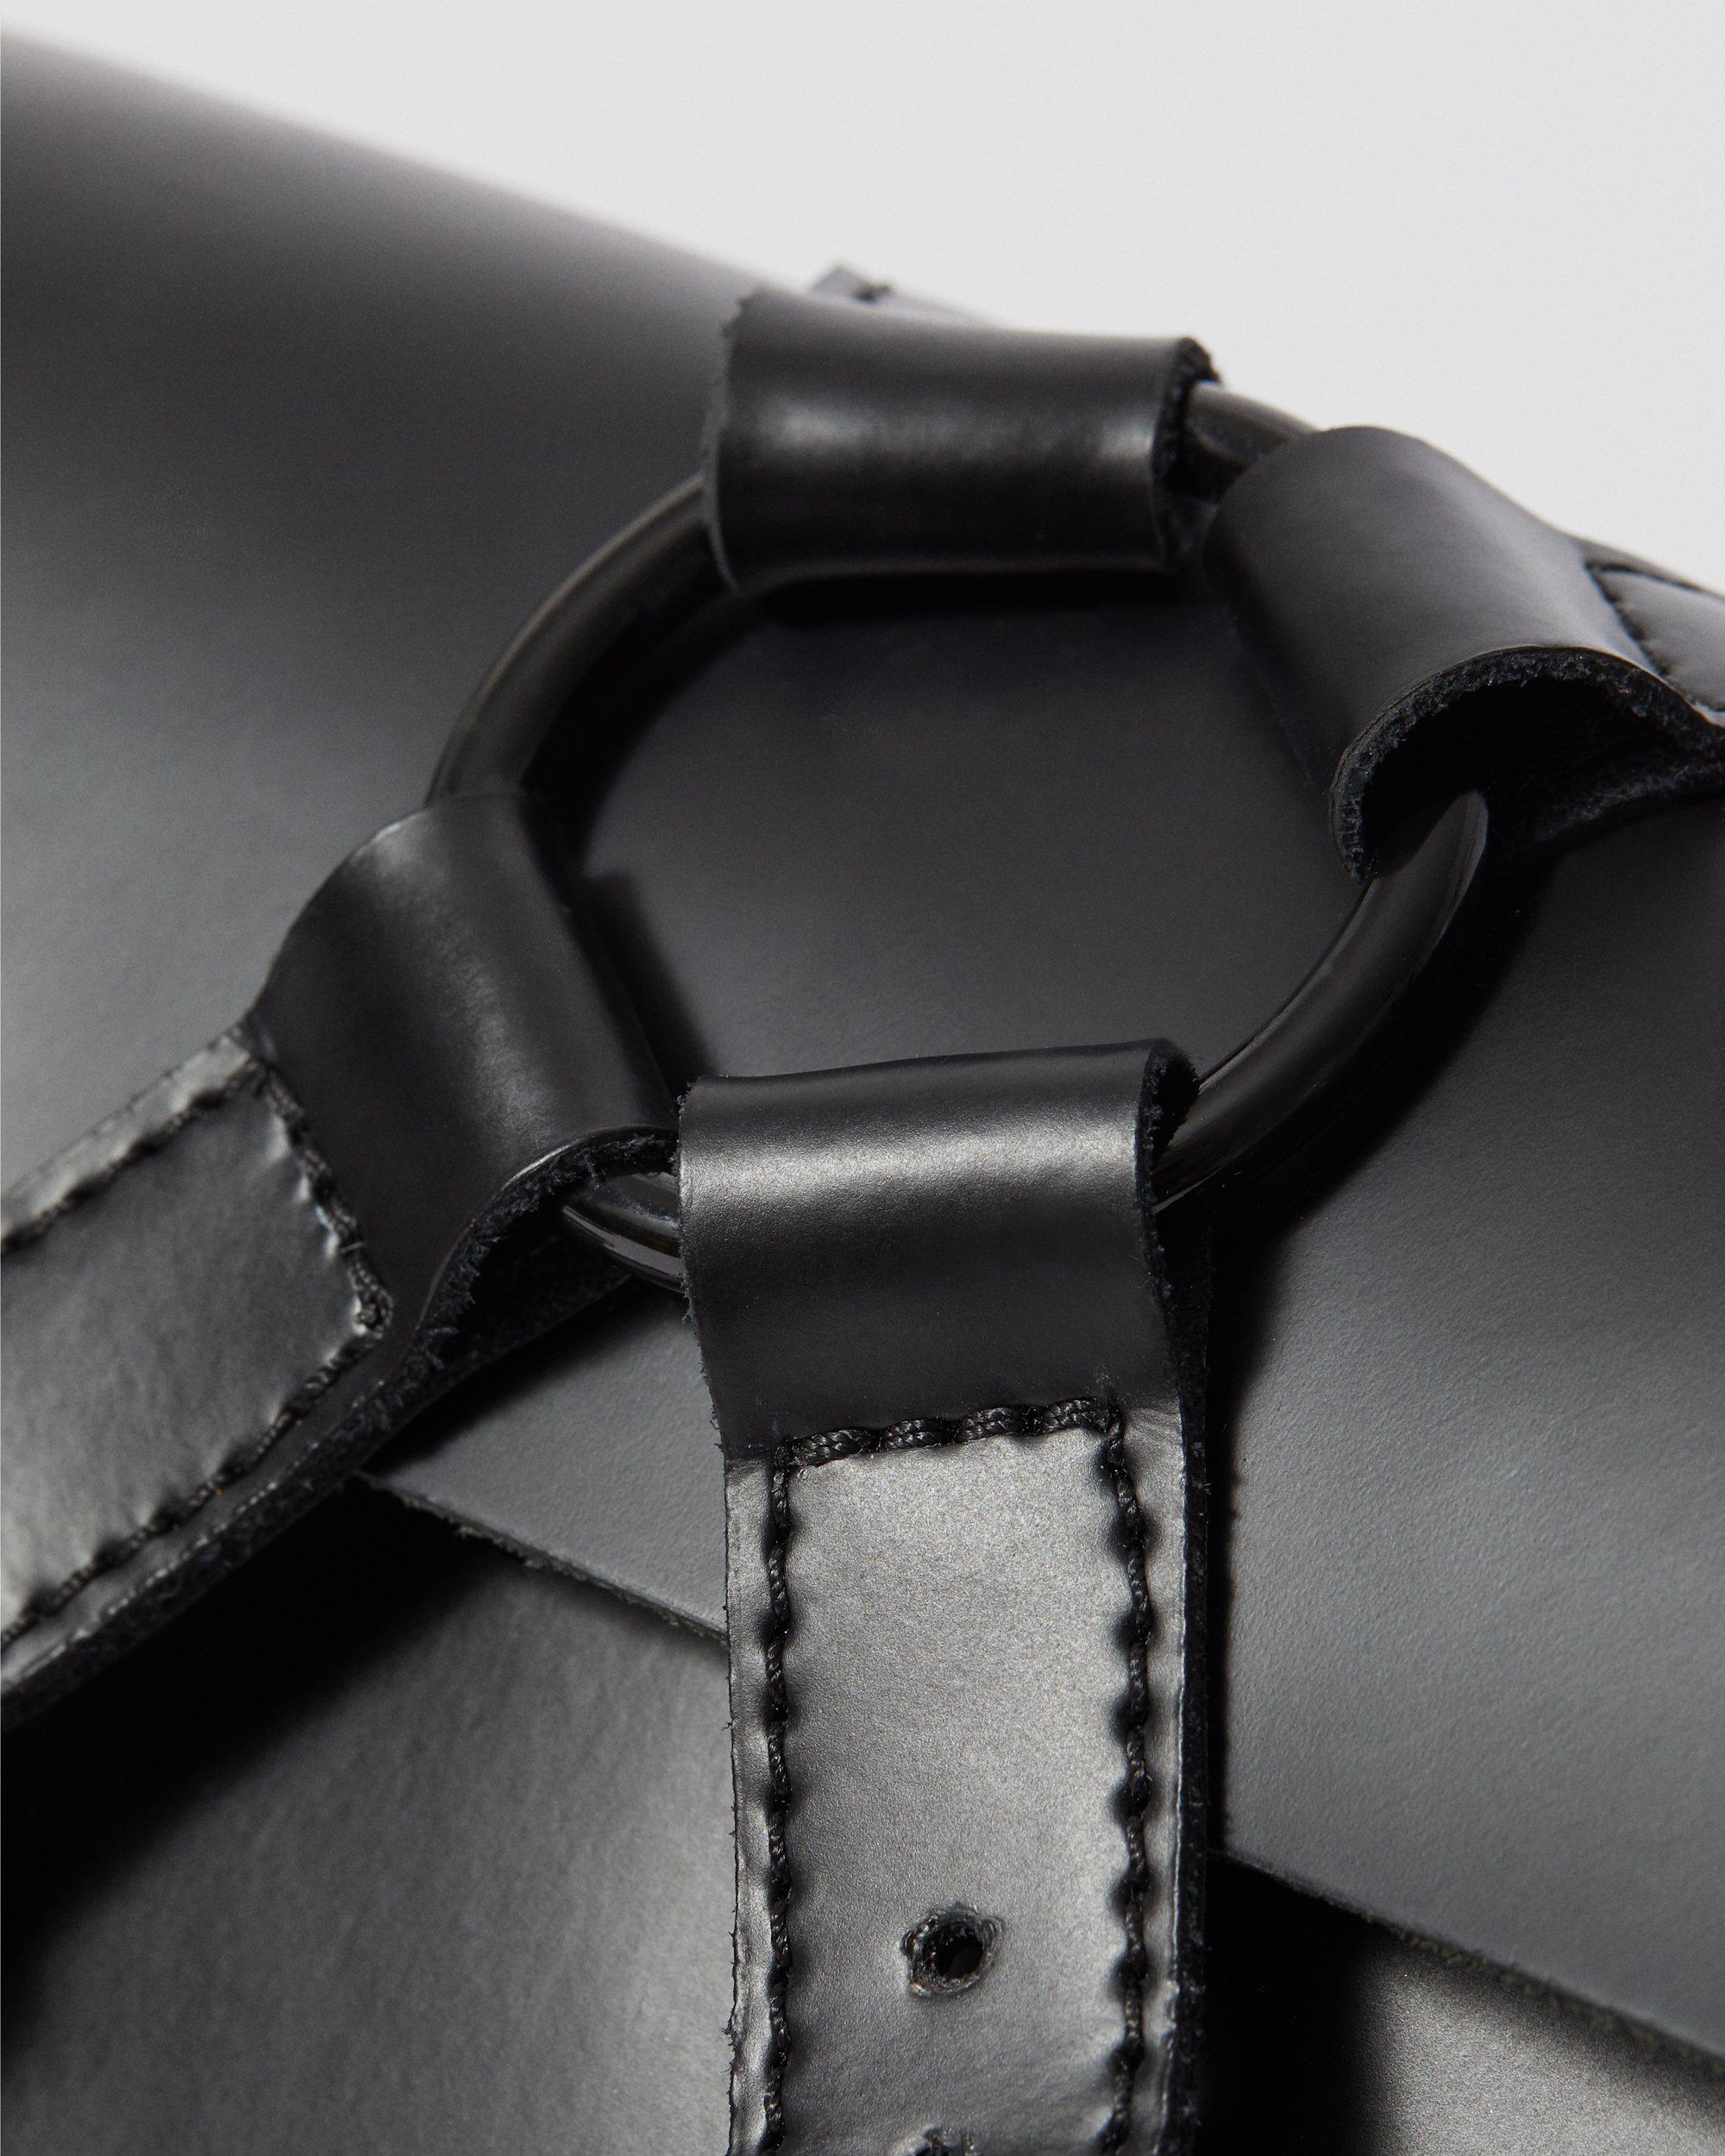 BUCKLE 7 INCH LEATHER SATCHEL in Black